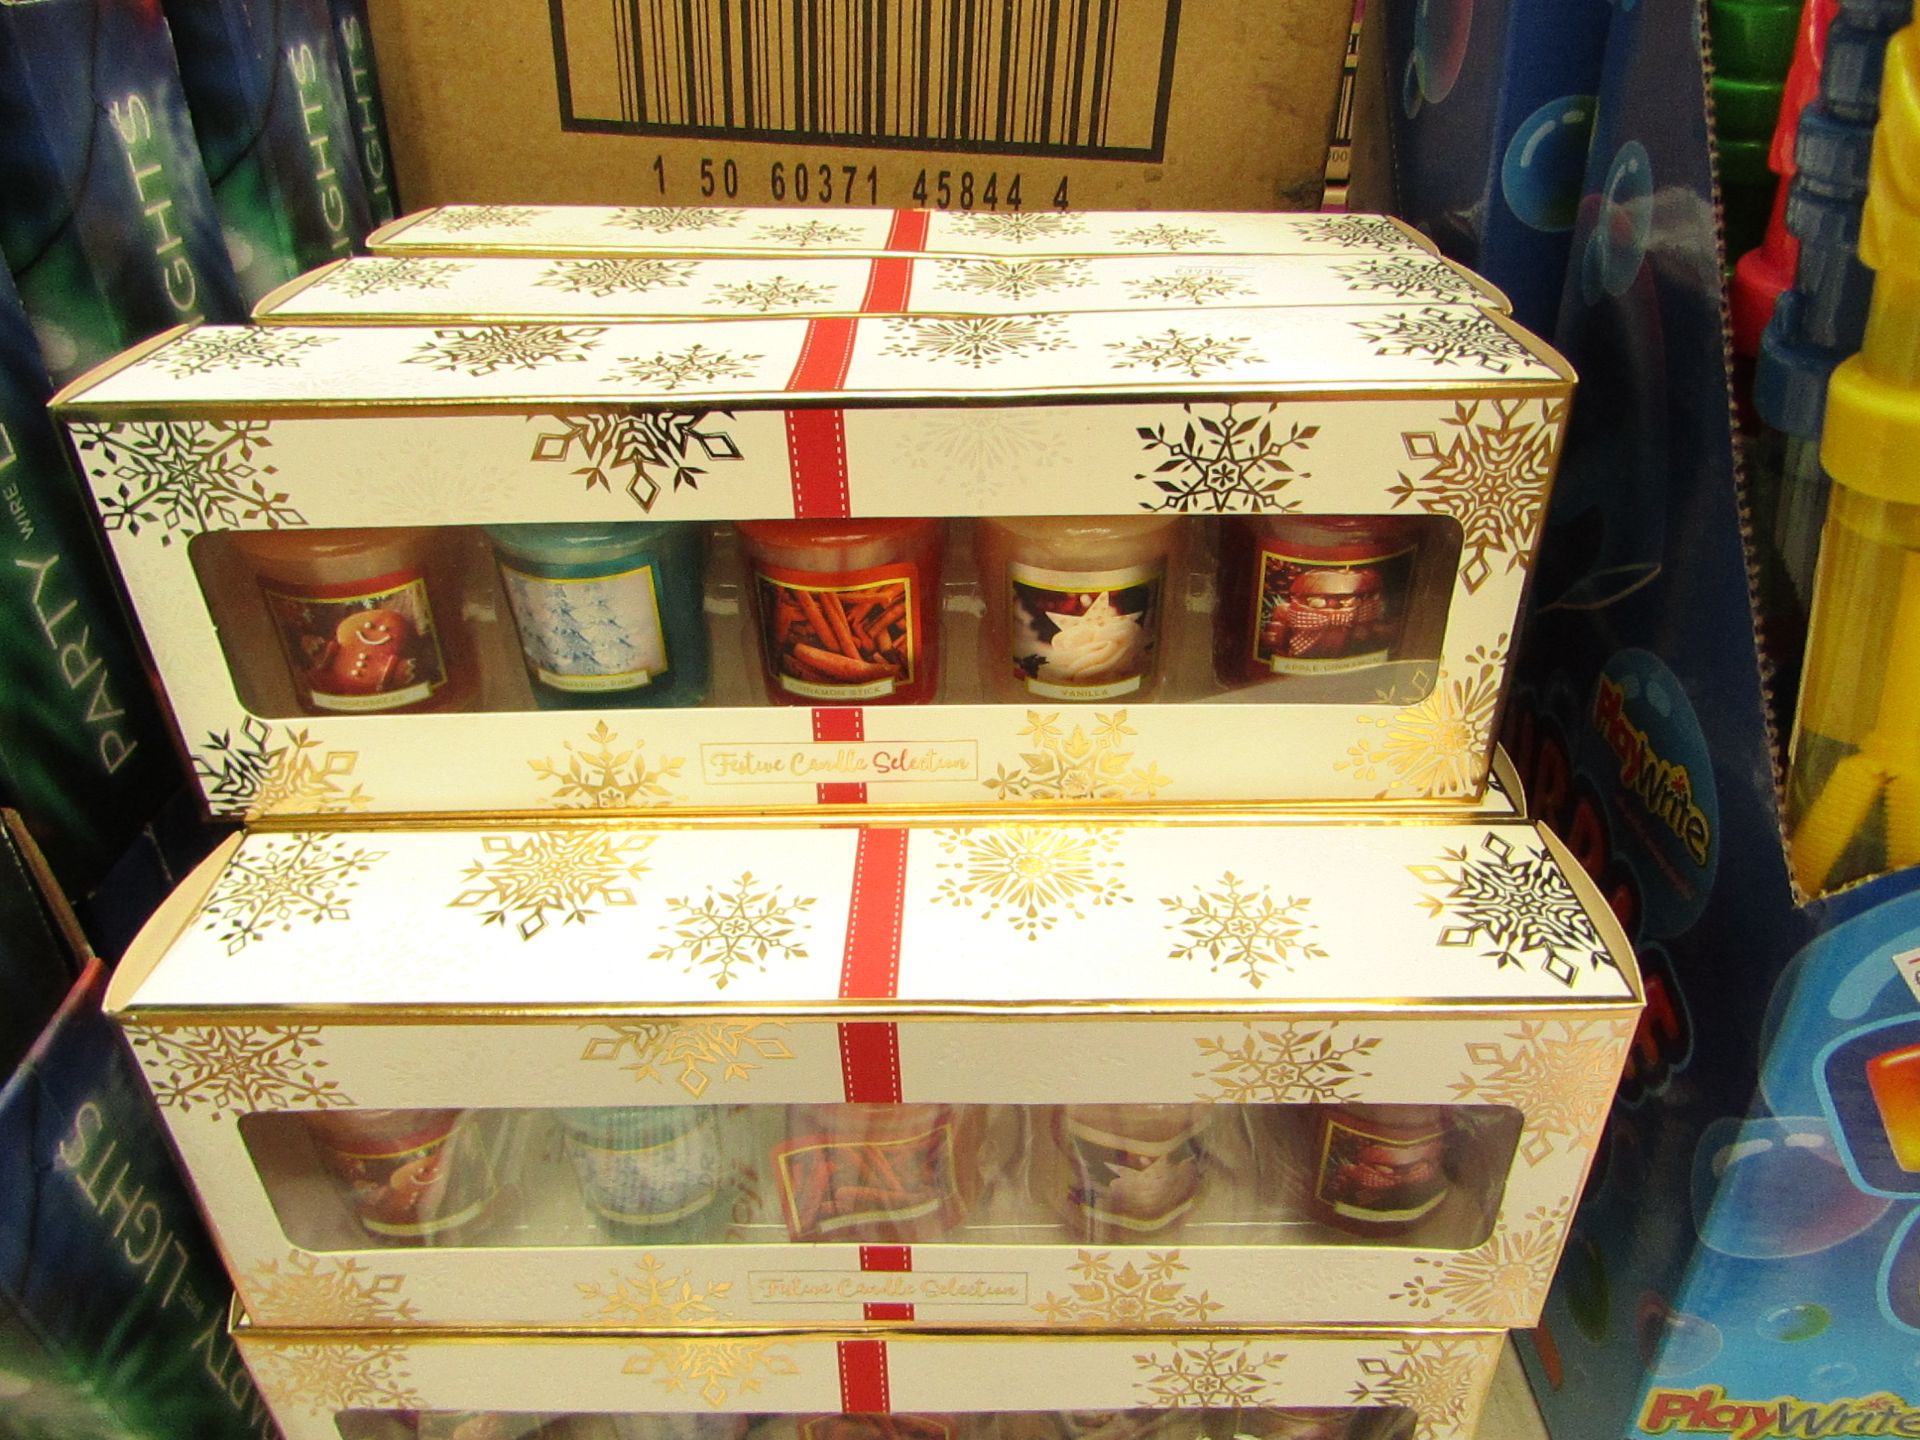 3 Packs of 5 Festive Candles. Incl Apple Cinnamon, Gingerbread, Vanilla Etc. New & Packaged